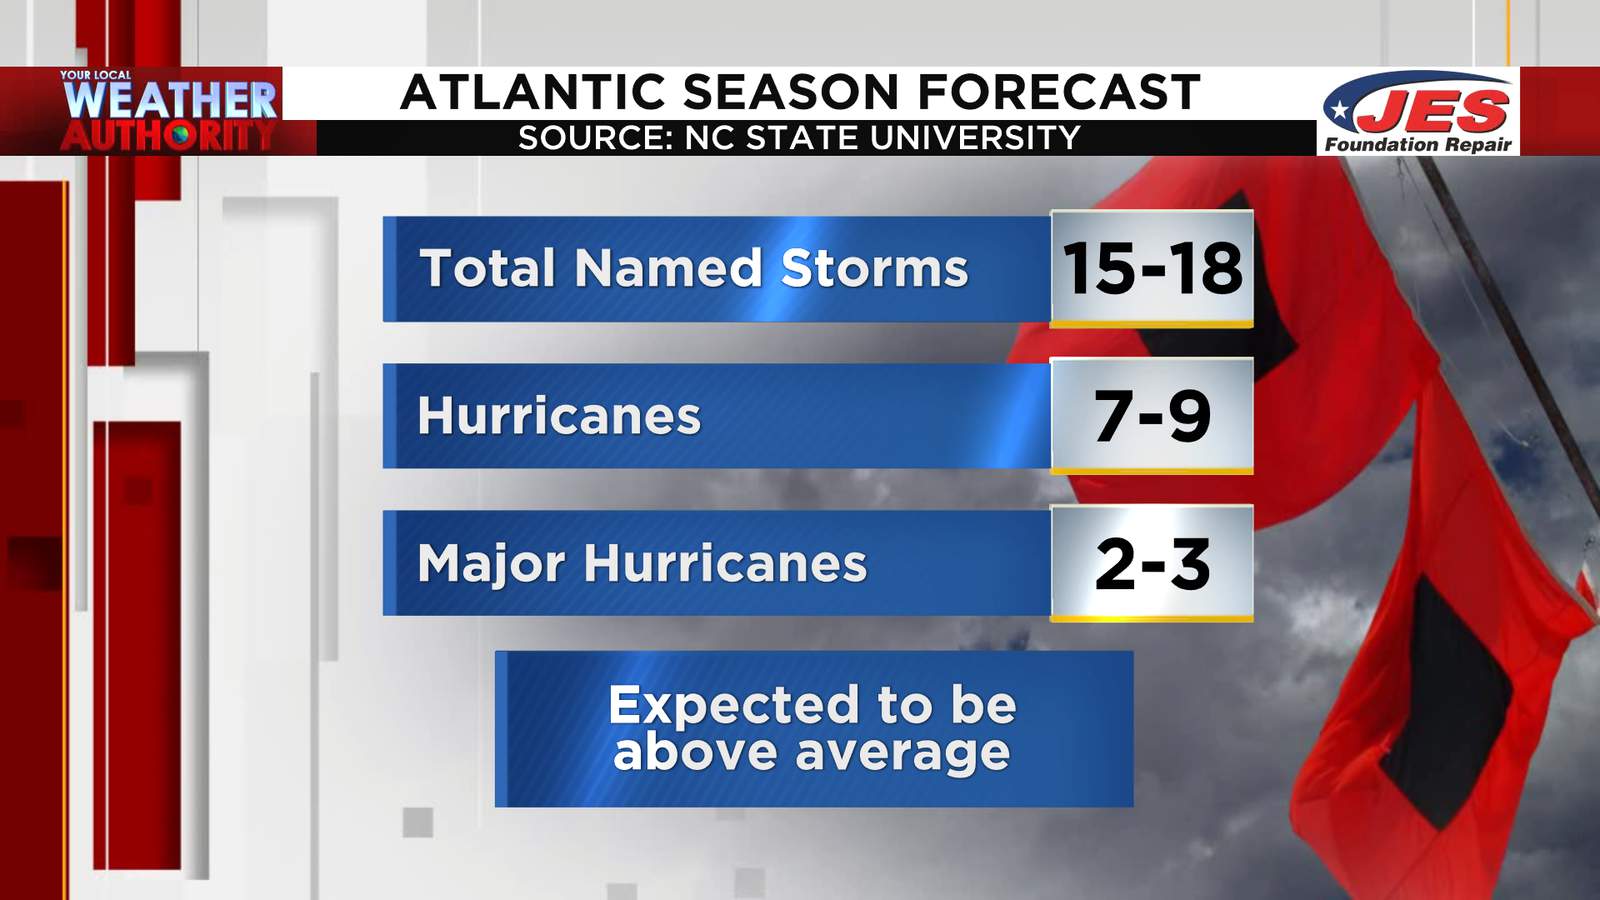 Another one! NC State joins Colorado State, forecasts active hurricane season